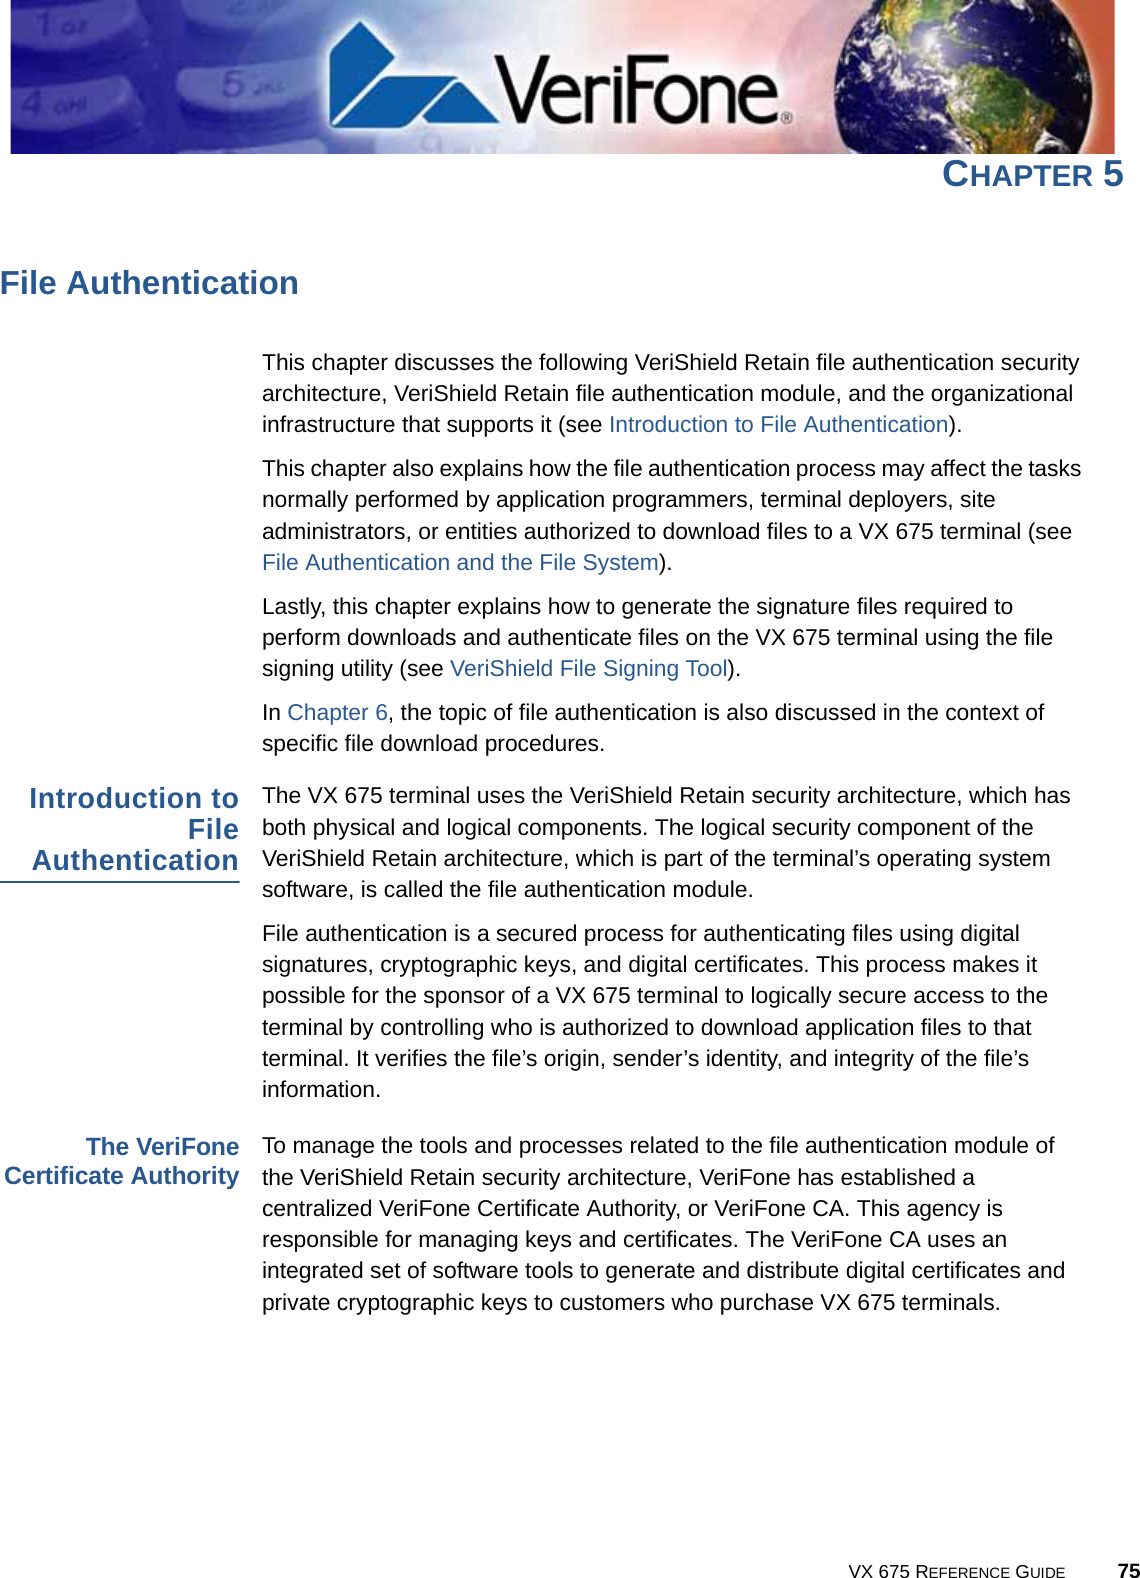 VX 675 REFERENCE GUIDE 75CHAPTER 5File AuthenticationThis chapter discusses the following VeriShield Retain file authentication security architecture, VeriShield Retain file authentication module, and the organizational infrastructure that supports it (see Introduction to File Authentication). This chapter also explains how the file authentication process may affect the tasks normally performed by application programmers, terminal deployers, site administrators, or entities authorized to download files to a VX 675 terminal (see File Authentication and the File System).Lastly, this chapter explains how to generate the signature files required to perform downloads and authenticate files on the VX 675 terminal using the file signing utility (see VeriShield File Signing Tool).In Chapter 6, the topic of file authentication is also discussed in the context of specific file download procedures.Introduction toFileAuthenticationThe VX 675 terminal uses the VeriShield Retain security architecture, which has both physical and logical components. The logical security component of the VeriShield Retain architecture, which is part of the terminal’s operating system software, is called the file authentication module.File authentication is a secured process for authenticating files using digital signatures, cryptographic keys, and digital certificates. This process makes it possible for the sponsor of a VX 675 terminal to logically secure access to the terminal by controlling who is authorized to download application files to that terminal. It verifies the file’s origin, sender’s identity, and integrity of the file’s information.The VeriFoneCertificate AuthorityTo manage the tools and processes related to the file authentication module of the VeriShield Retain security architecture, VeriFone has established a centralized VeriFone Certificate Authority, or VeriFone CA. This agency is responsible for managing keys and certificates. The VeriFone CA uses an integrated set of software tools to generate and distribute digital certificates and private cryptographic keys to customers who purchase VX 675 terminals.